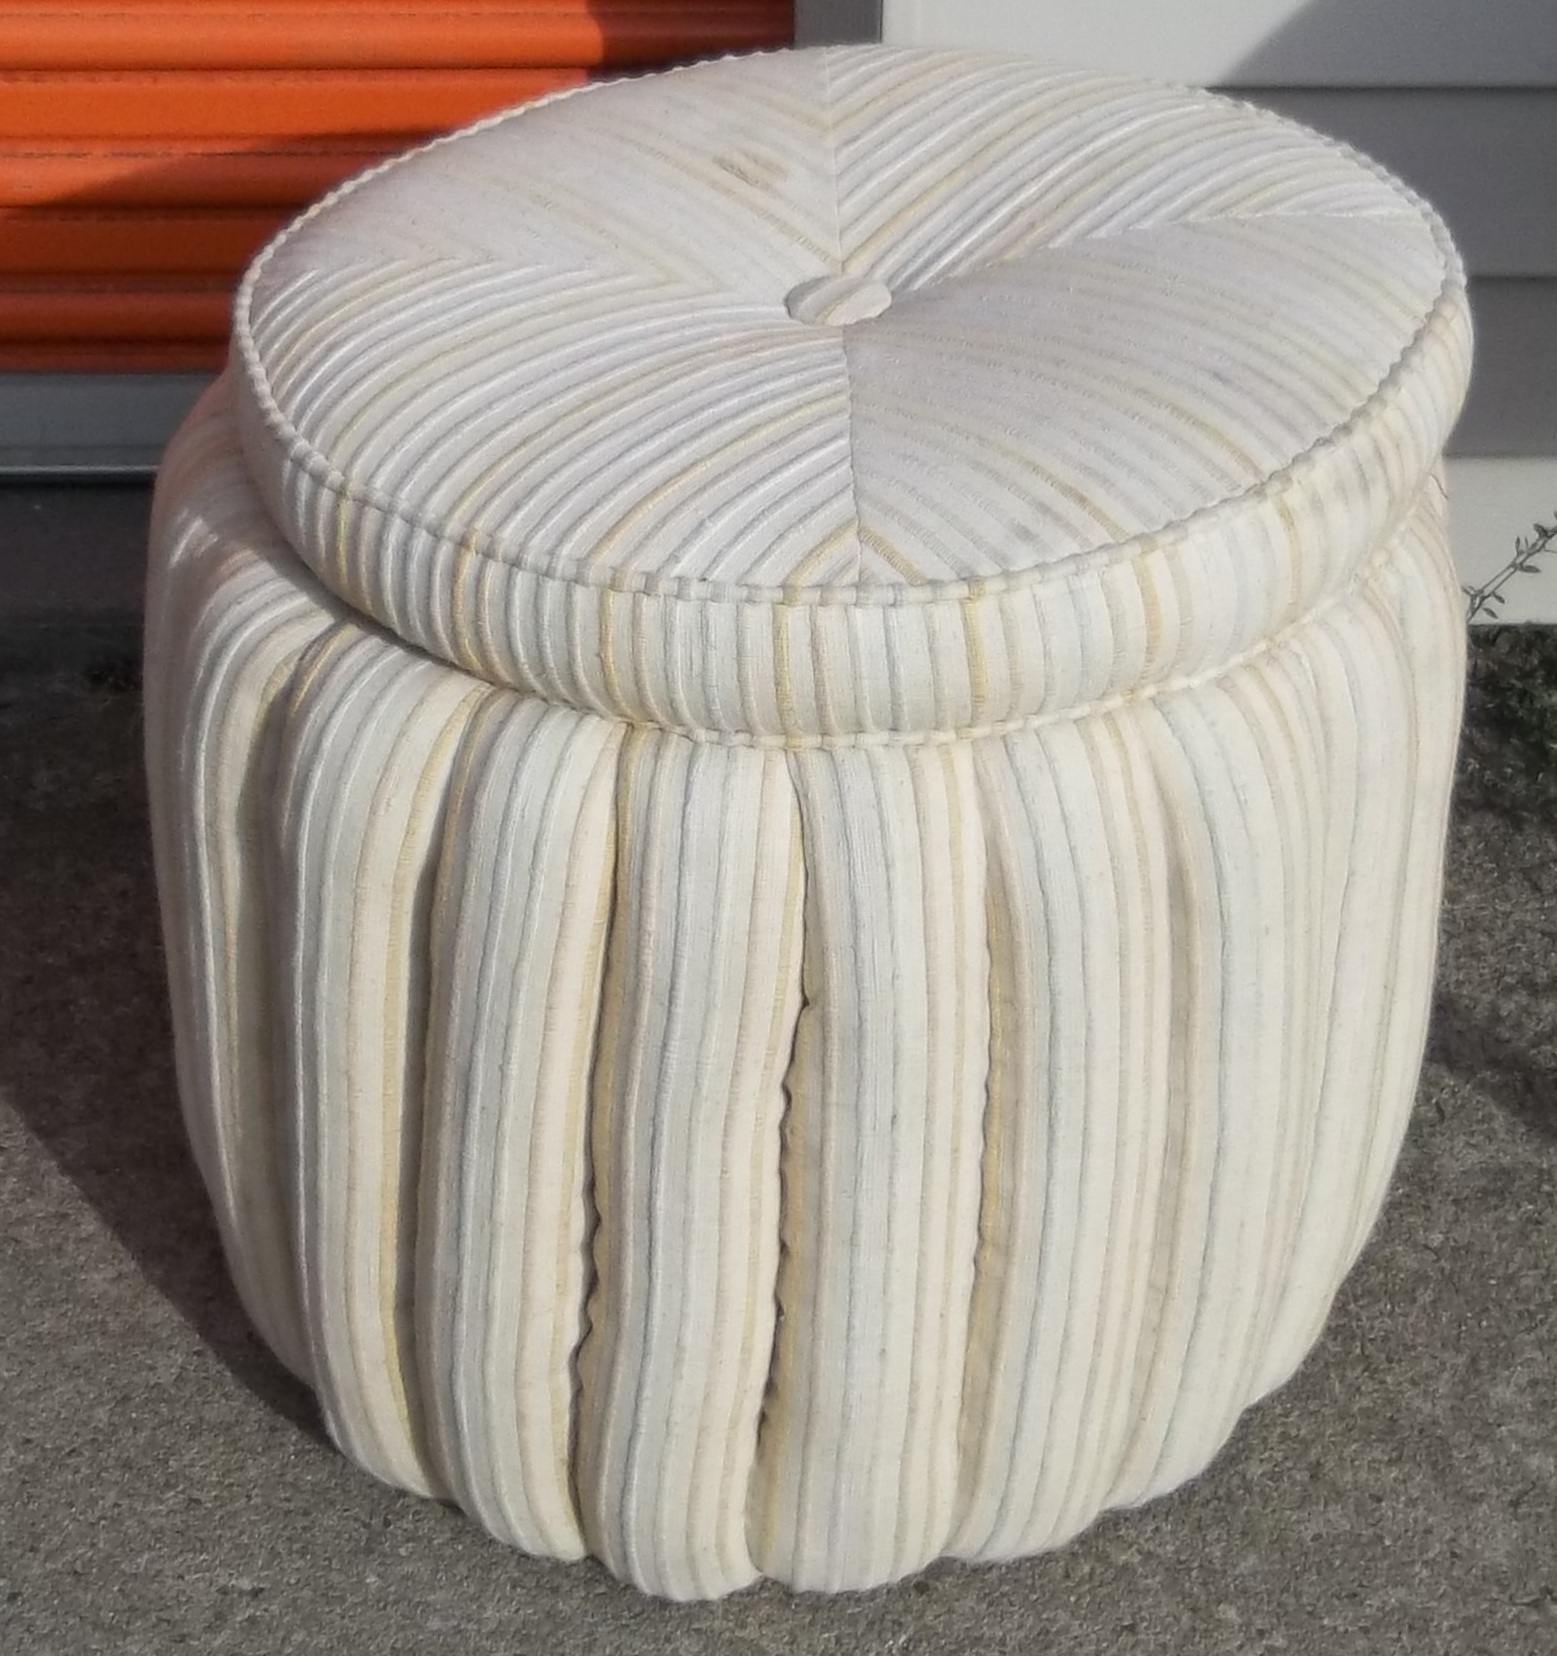 Small Ottoman With Storage